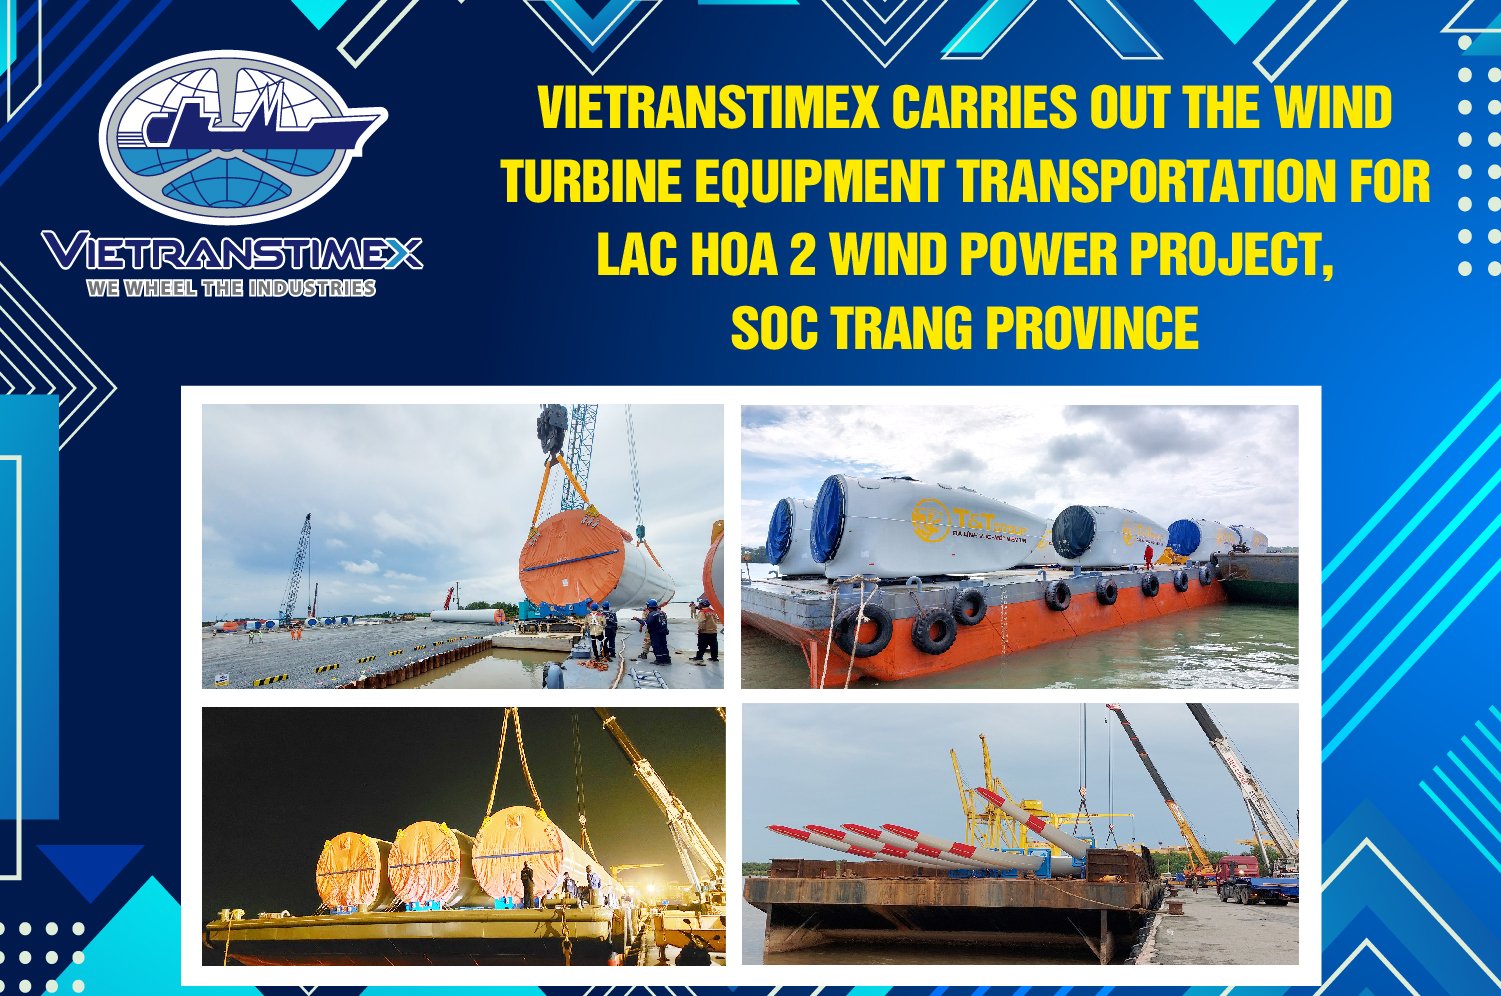 Vietranstimex Carries Out The Wind Turbine Equipment Transportation For Lac Hoa 2 Wind Power Project, Soc Trang Province